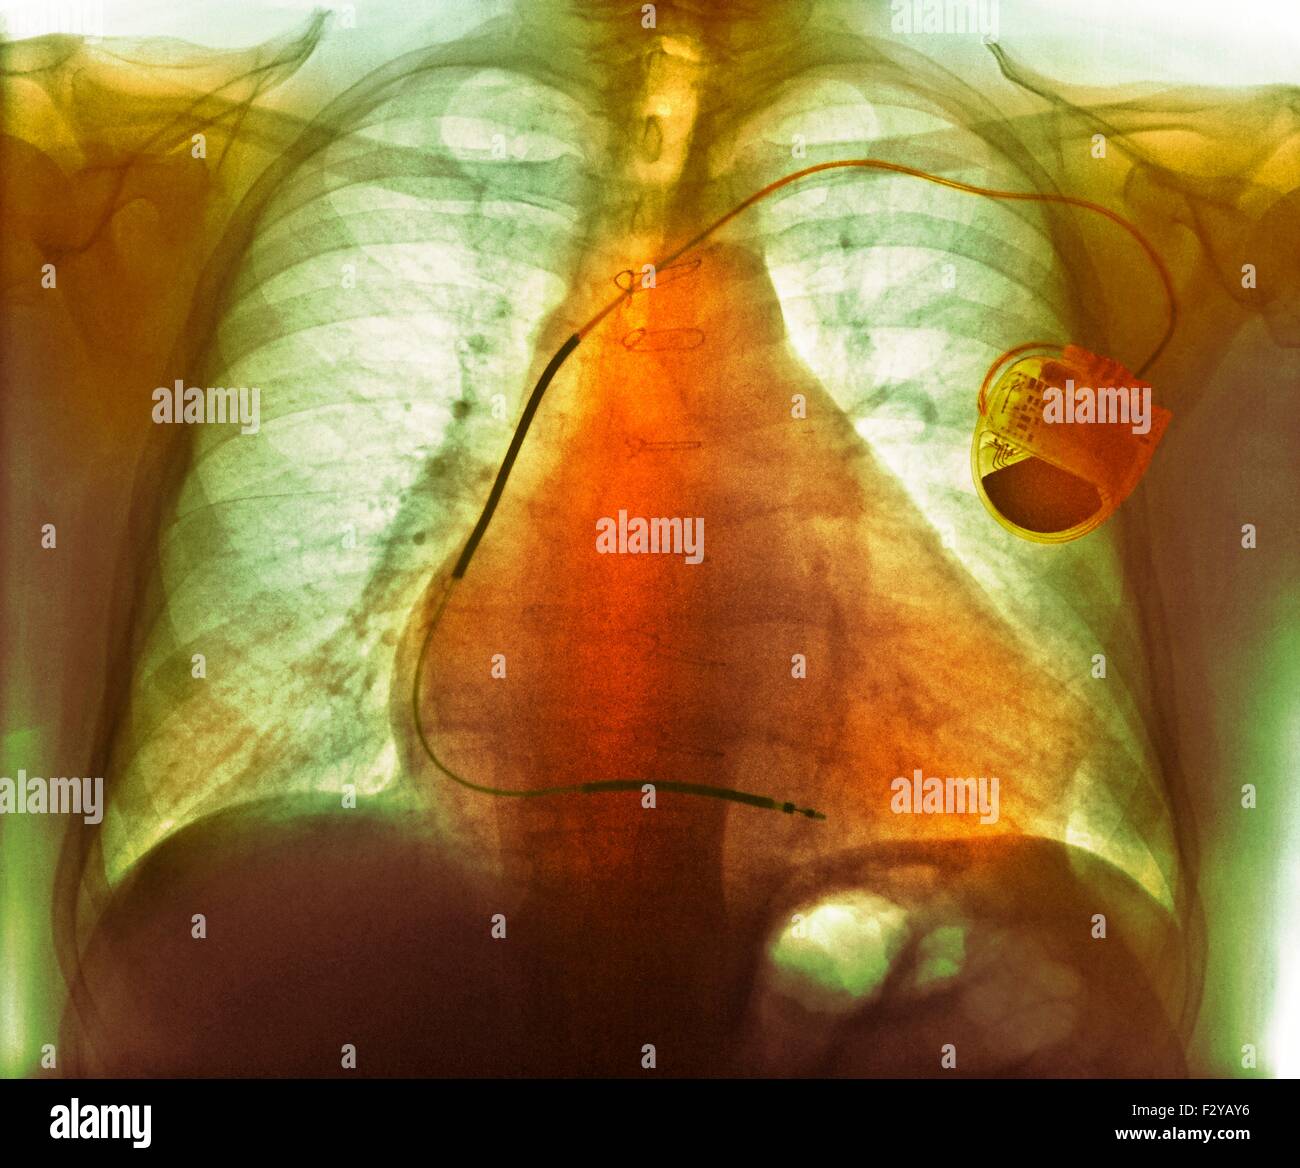 Pacemaker in heart disease. Coloured chest X-ray showing a pacemaker (right) fitted to a 73-year-old male patient with an enlarged heart (cardiomegaly) atrial fibrillation, ischaemic heart disease and chronic obstructive pulmonary disease (COPD). A pacemaker supplies electrical impulses to the heart to maintain the heartbeat at a regular rate. It may be external (worn on a belt) or internal (implanted in the chest, as here). Stock Photo